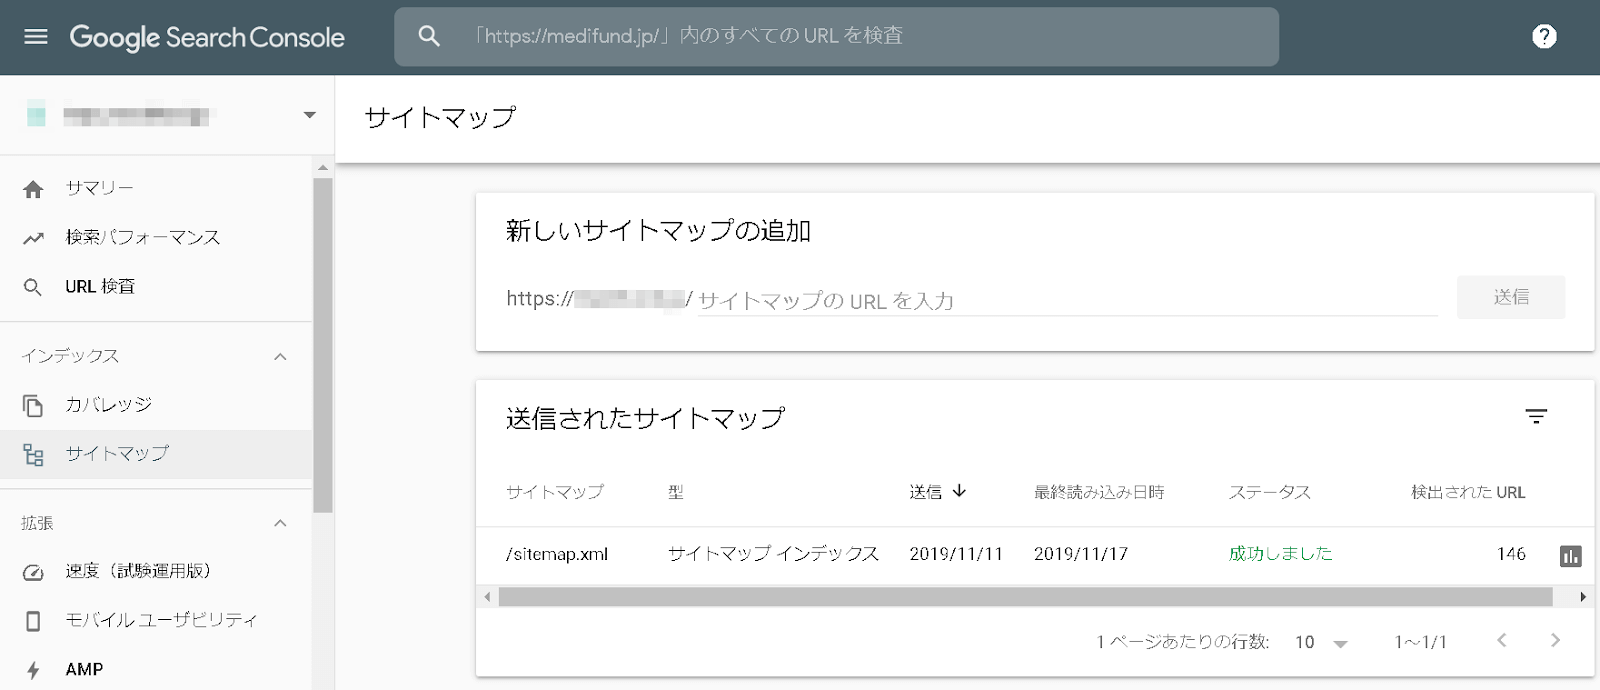 Search Consoleからサイトマップを送信する画面